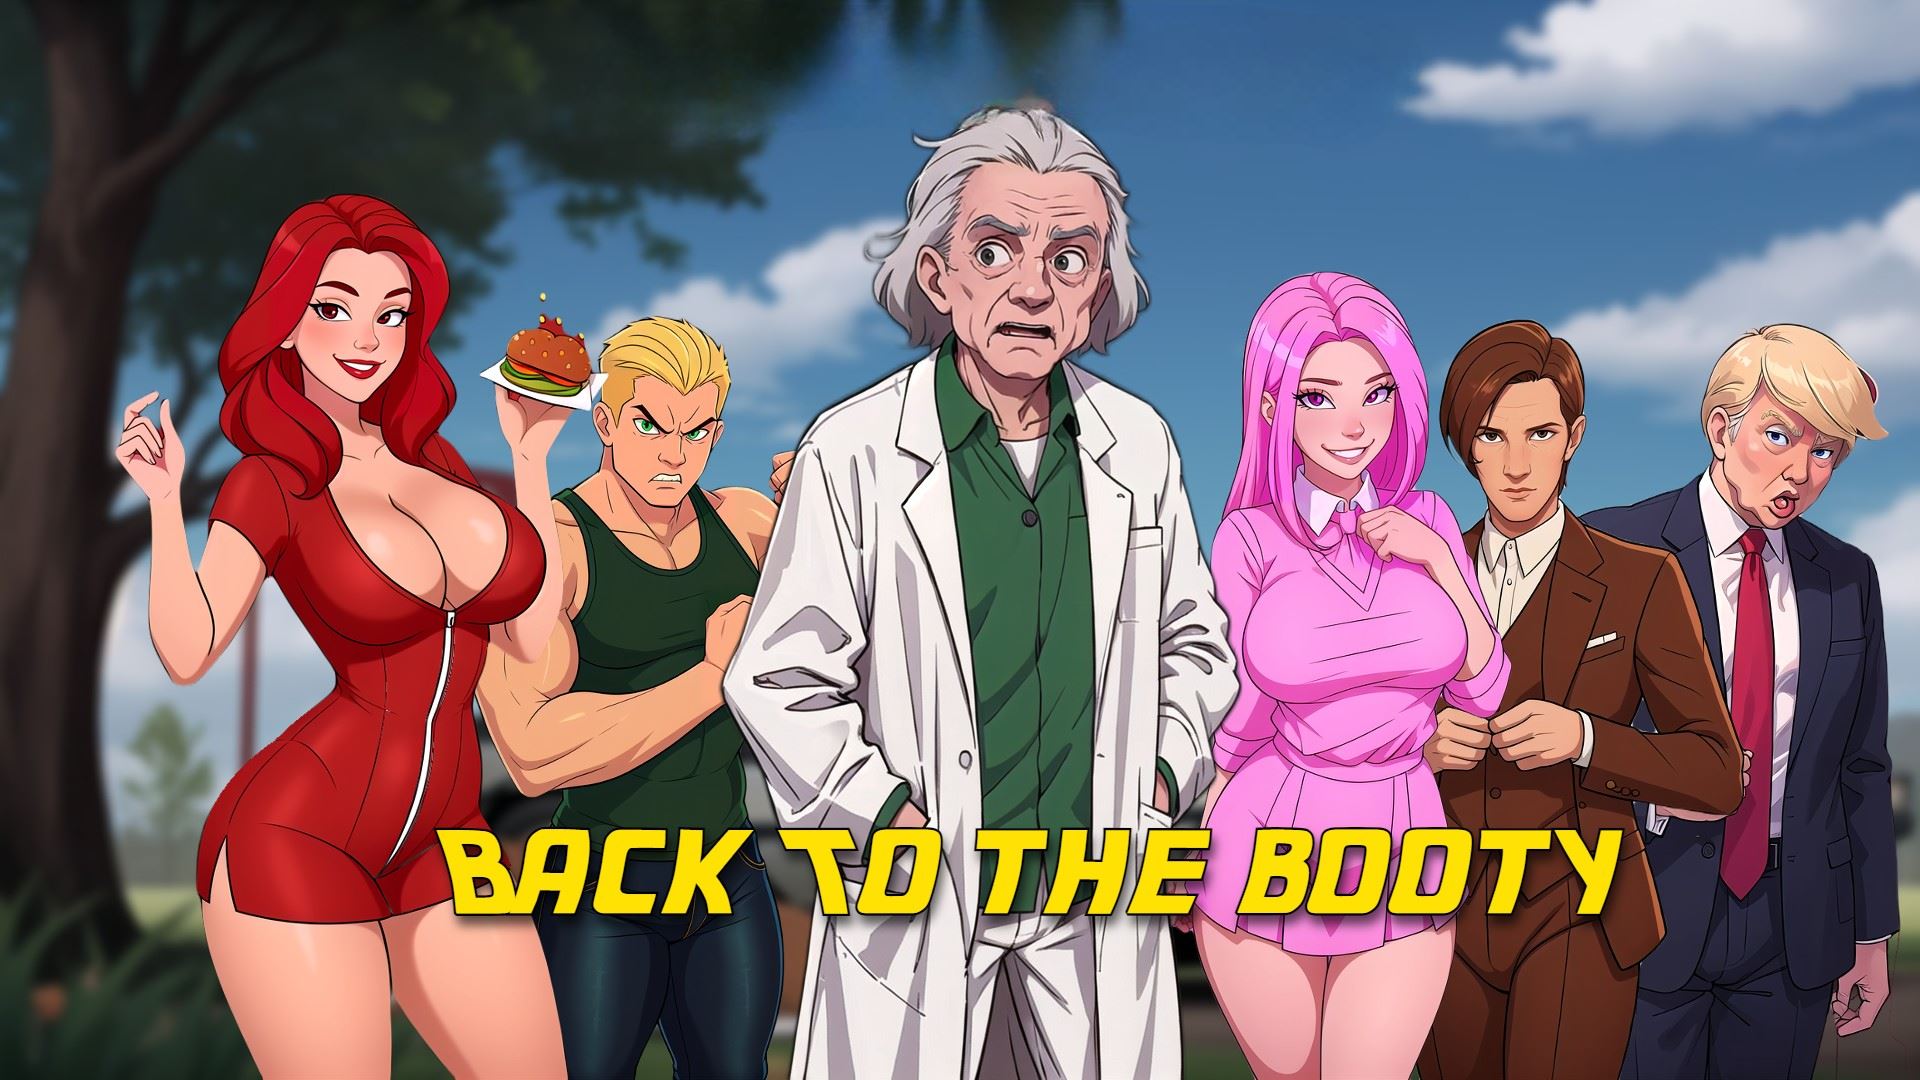 Back to the Booty porn xxx game download cover